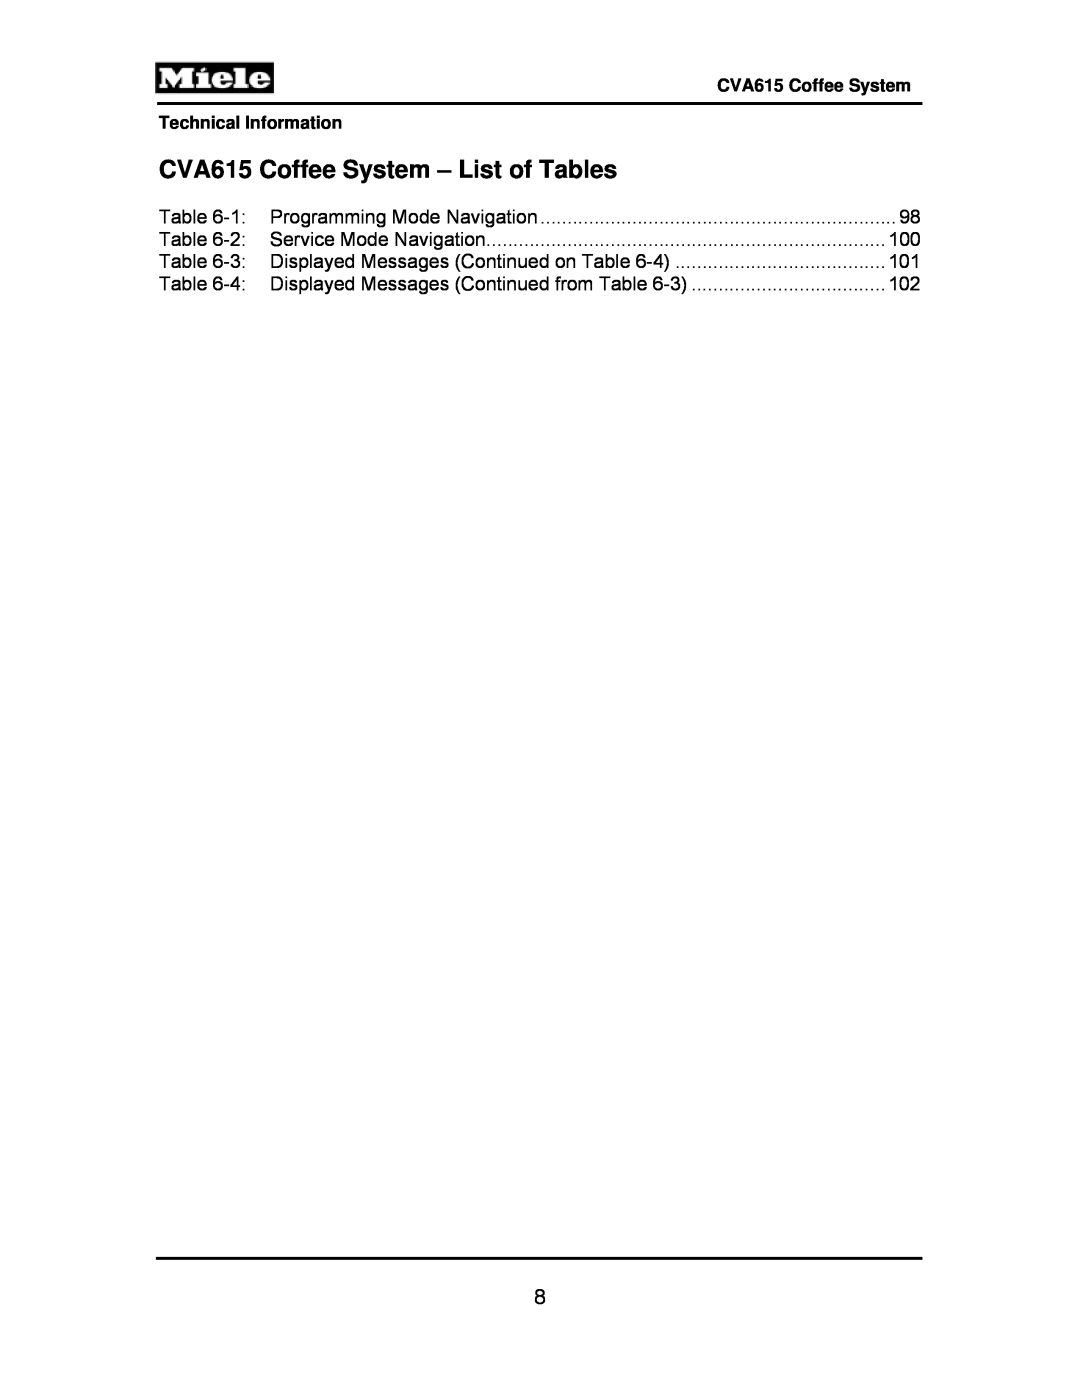 Miele manual CVA615 Coffee System – List of Tables, Technical Information, 2:Service Mode Navigation 